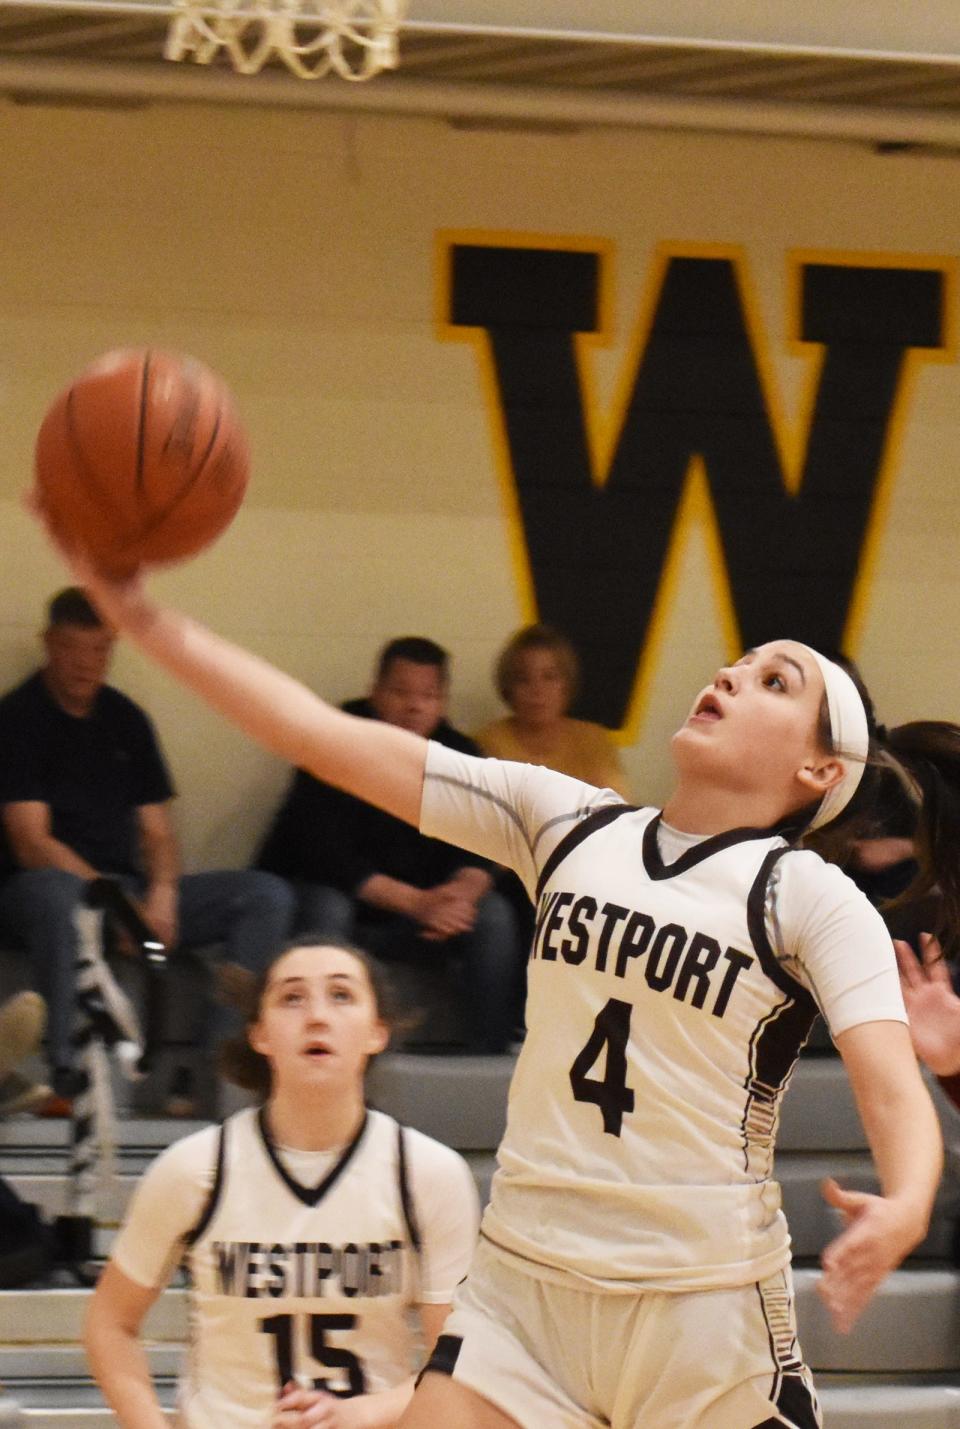 Westport's Leah Sylvain lays up a shot in front of teammate Meghan Molloy in this Feb. 13 file photo.